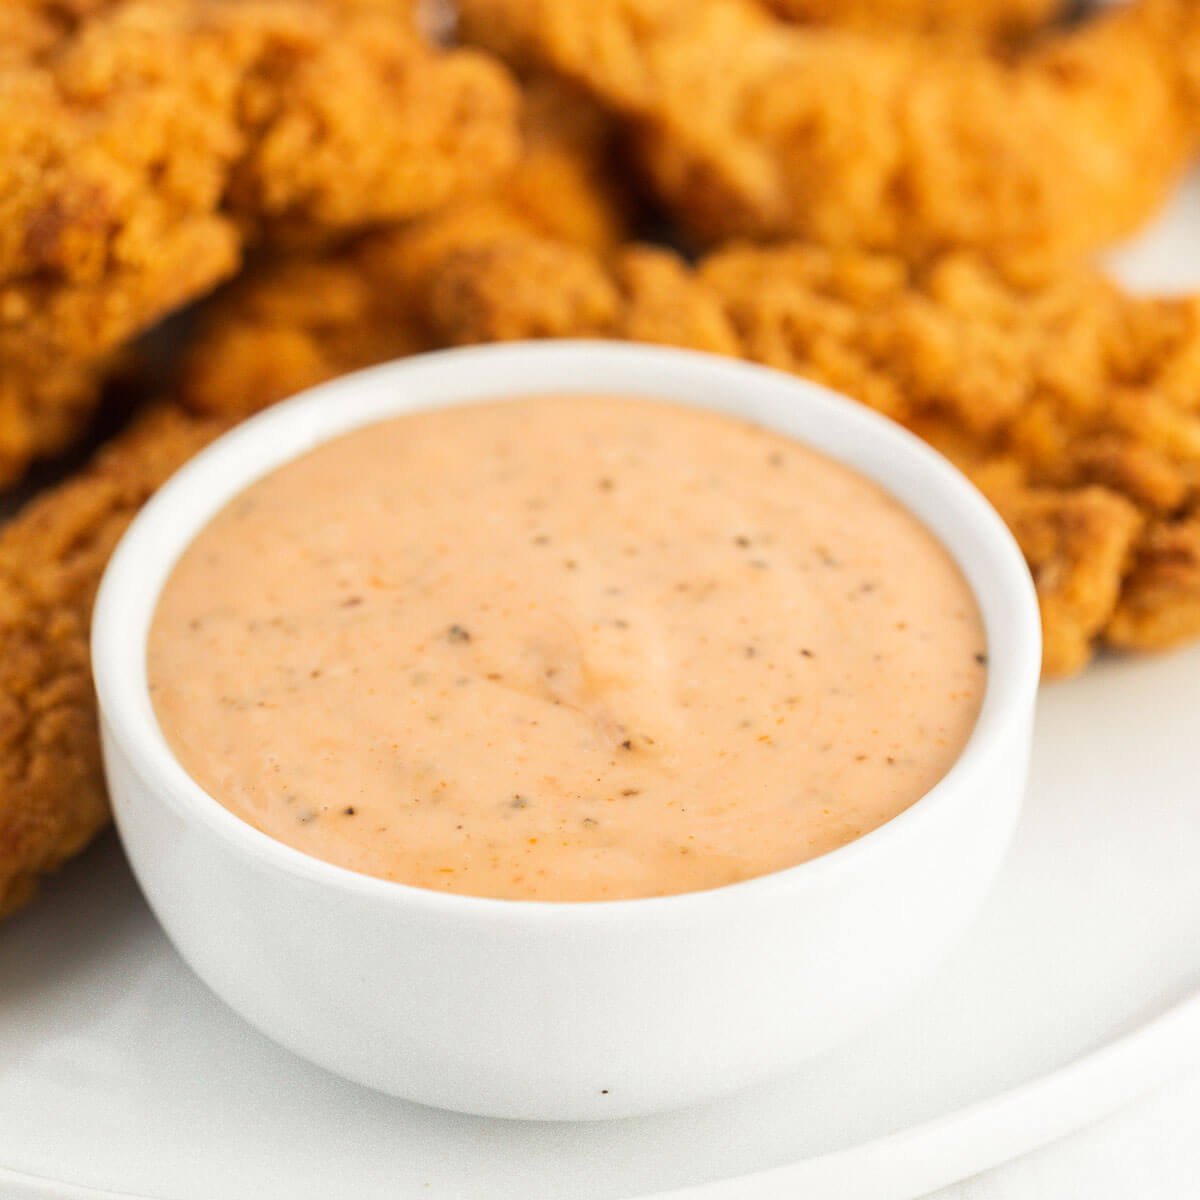 Close up image of chicken fingers and a bowl of chicken dipping sauce